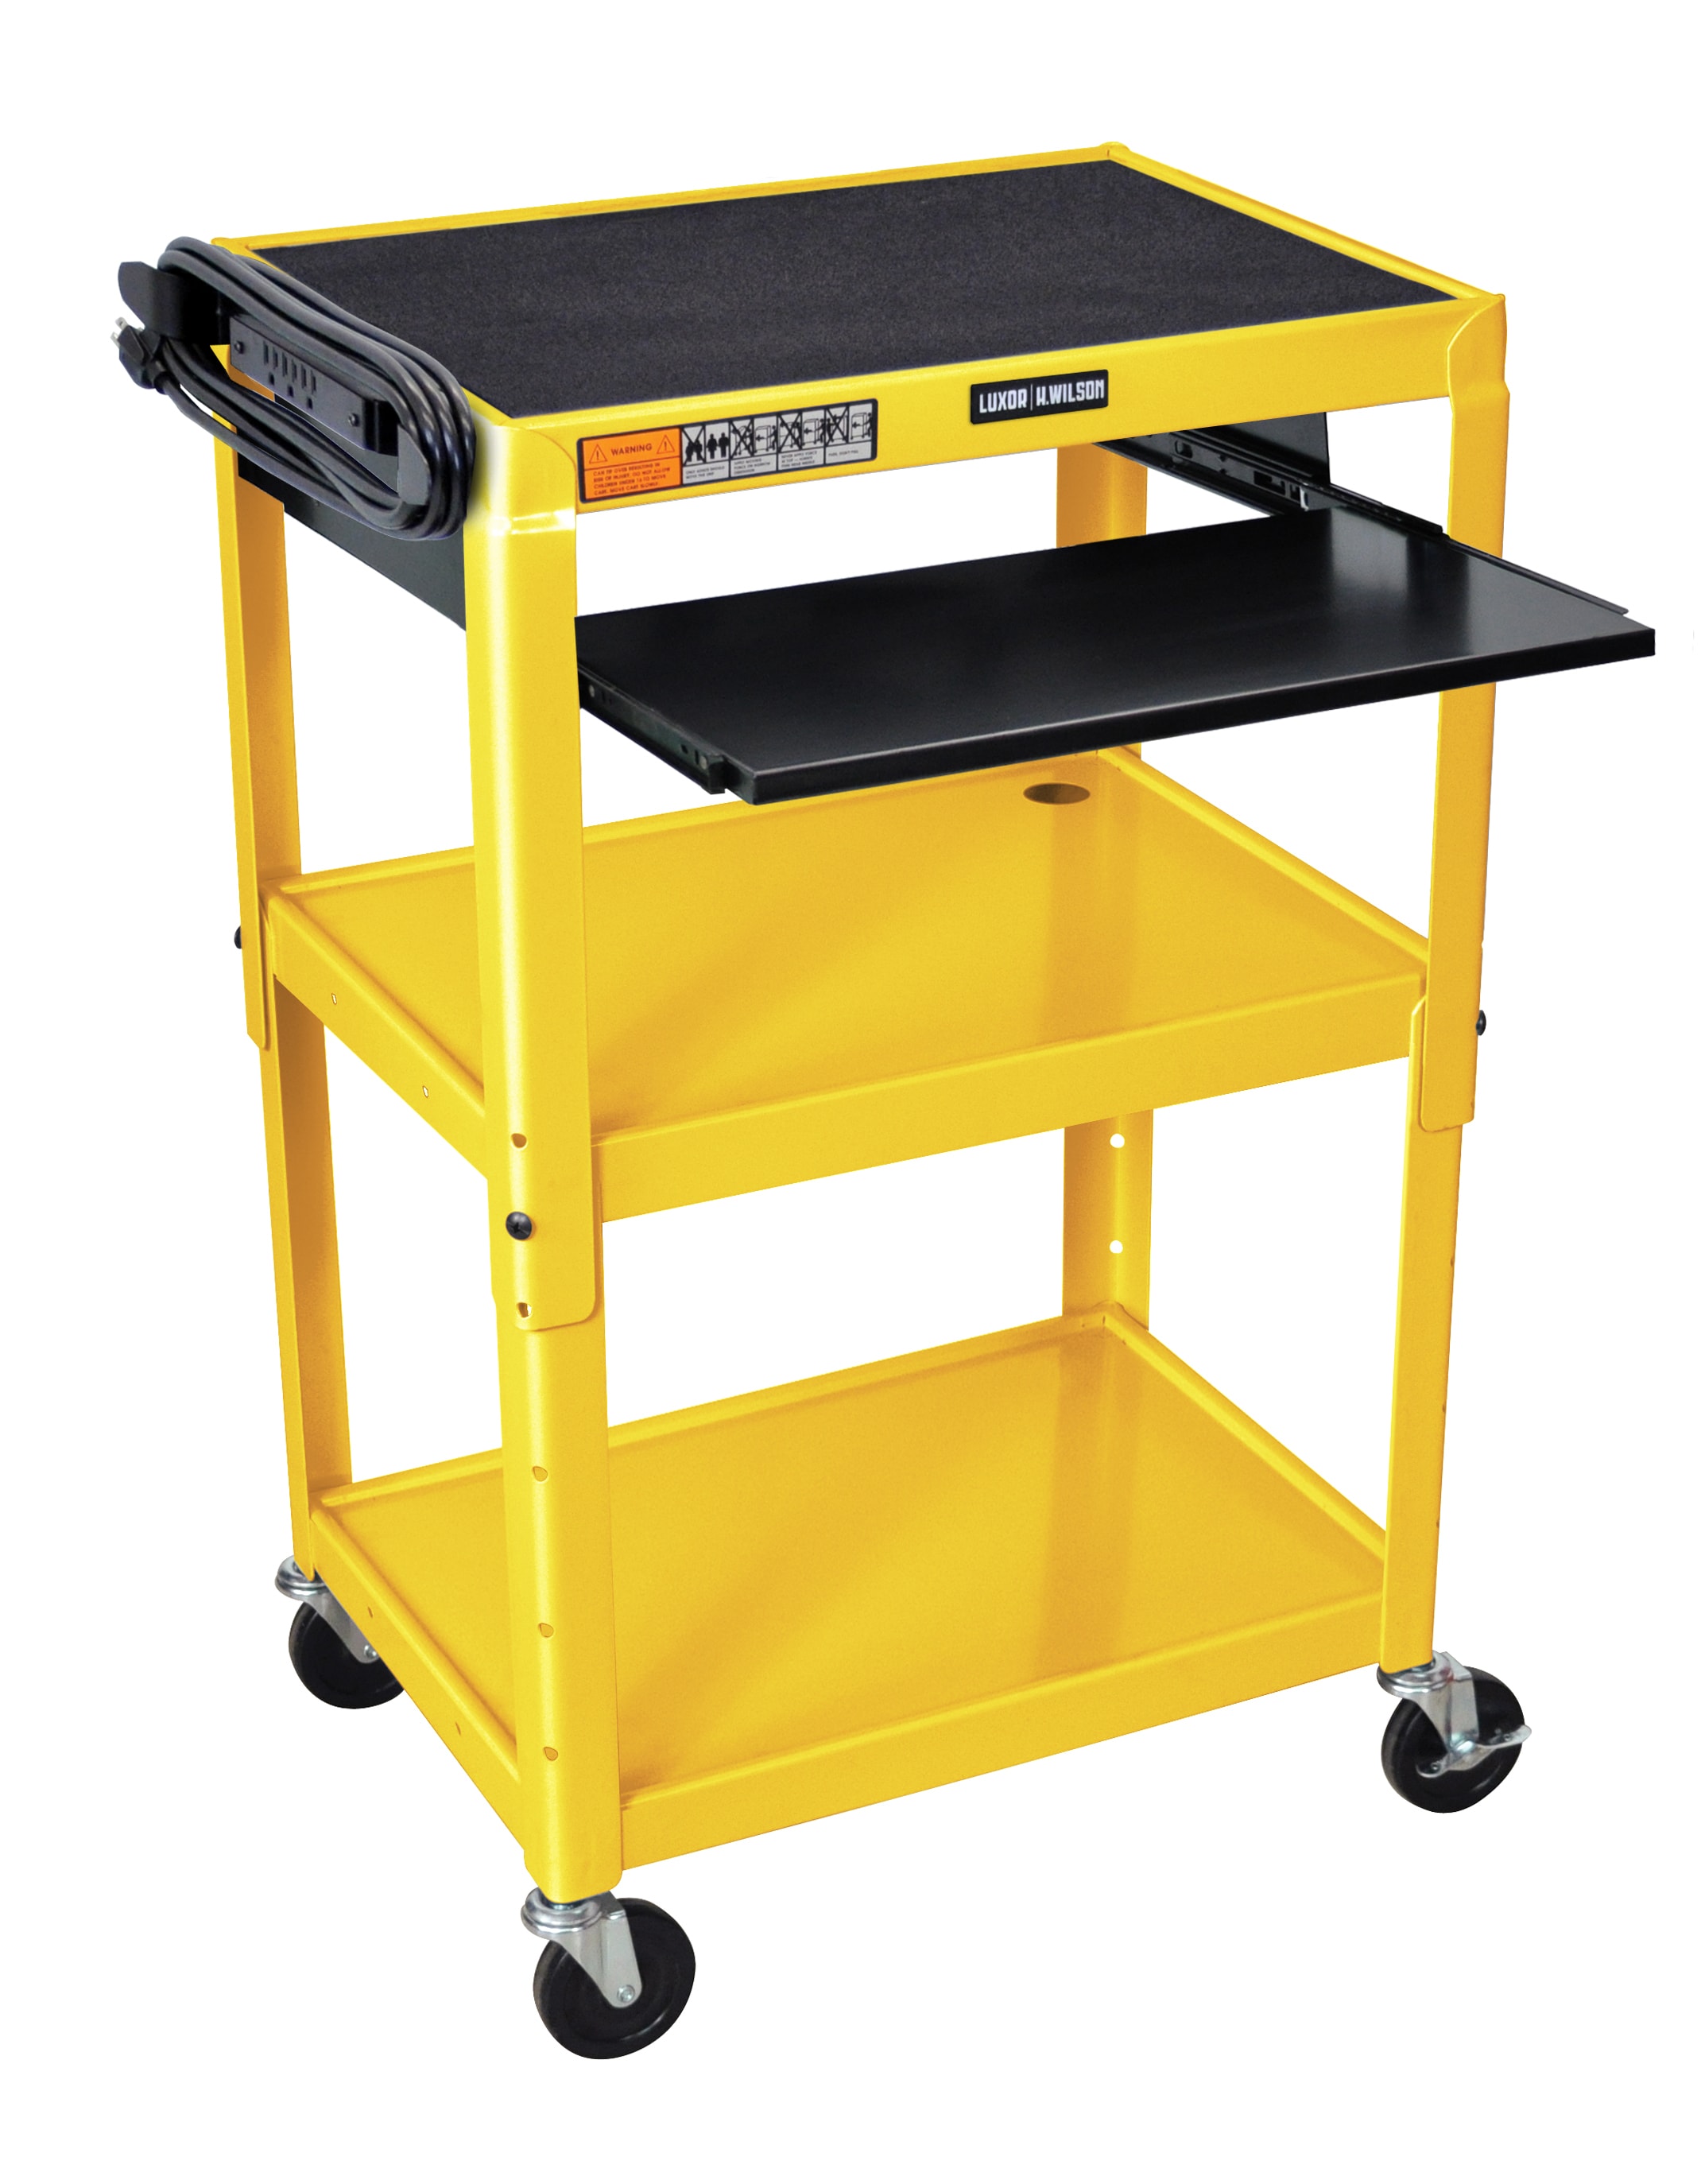 Rubbermaid Heavy-Duty Utility Cart:Furniture:Laboratory Carts and